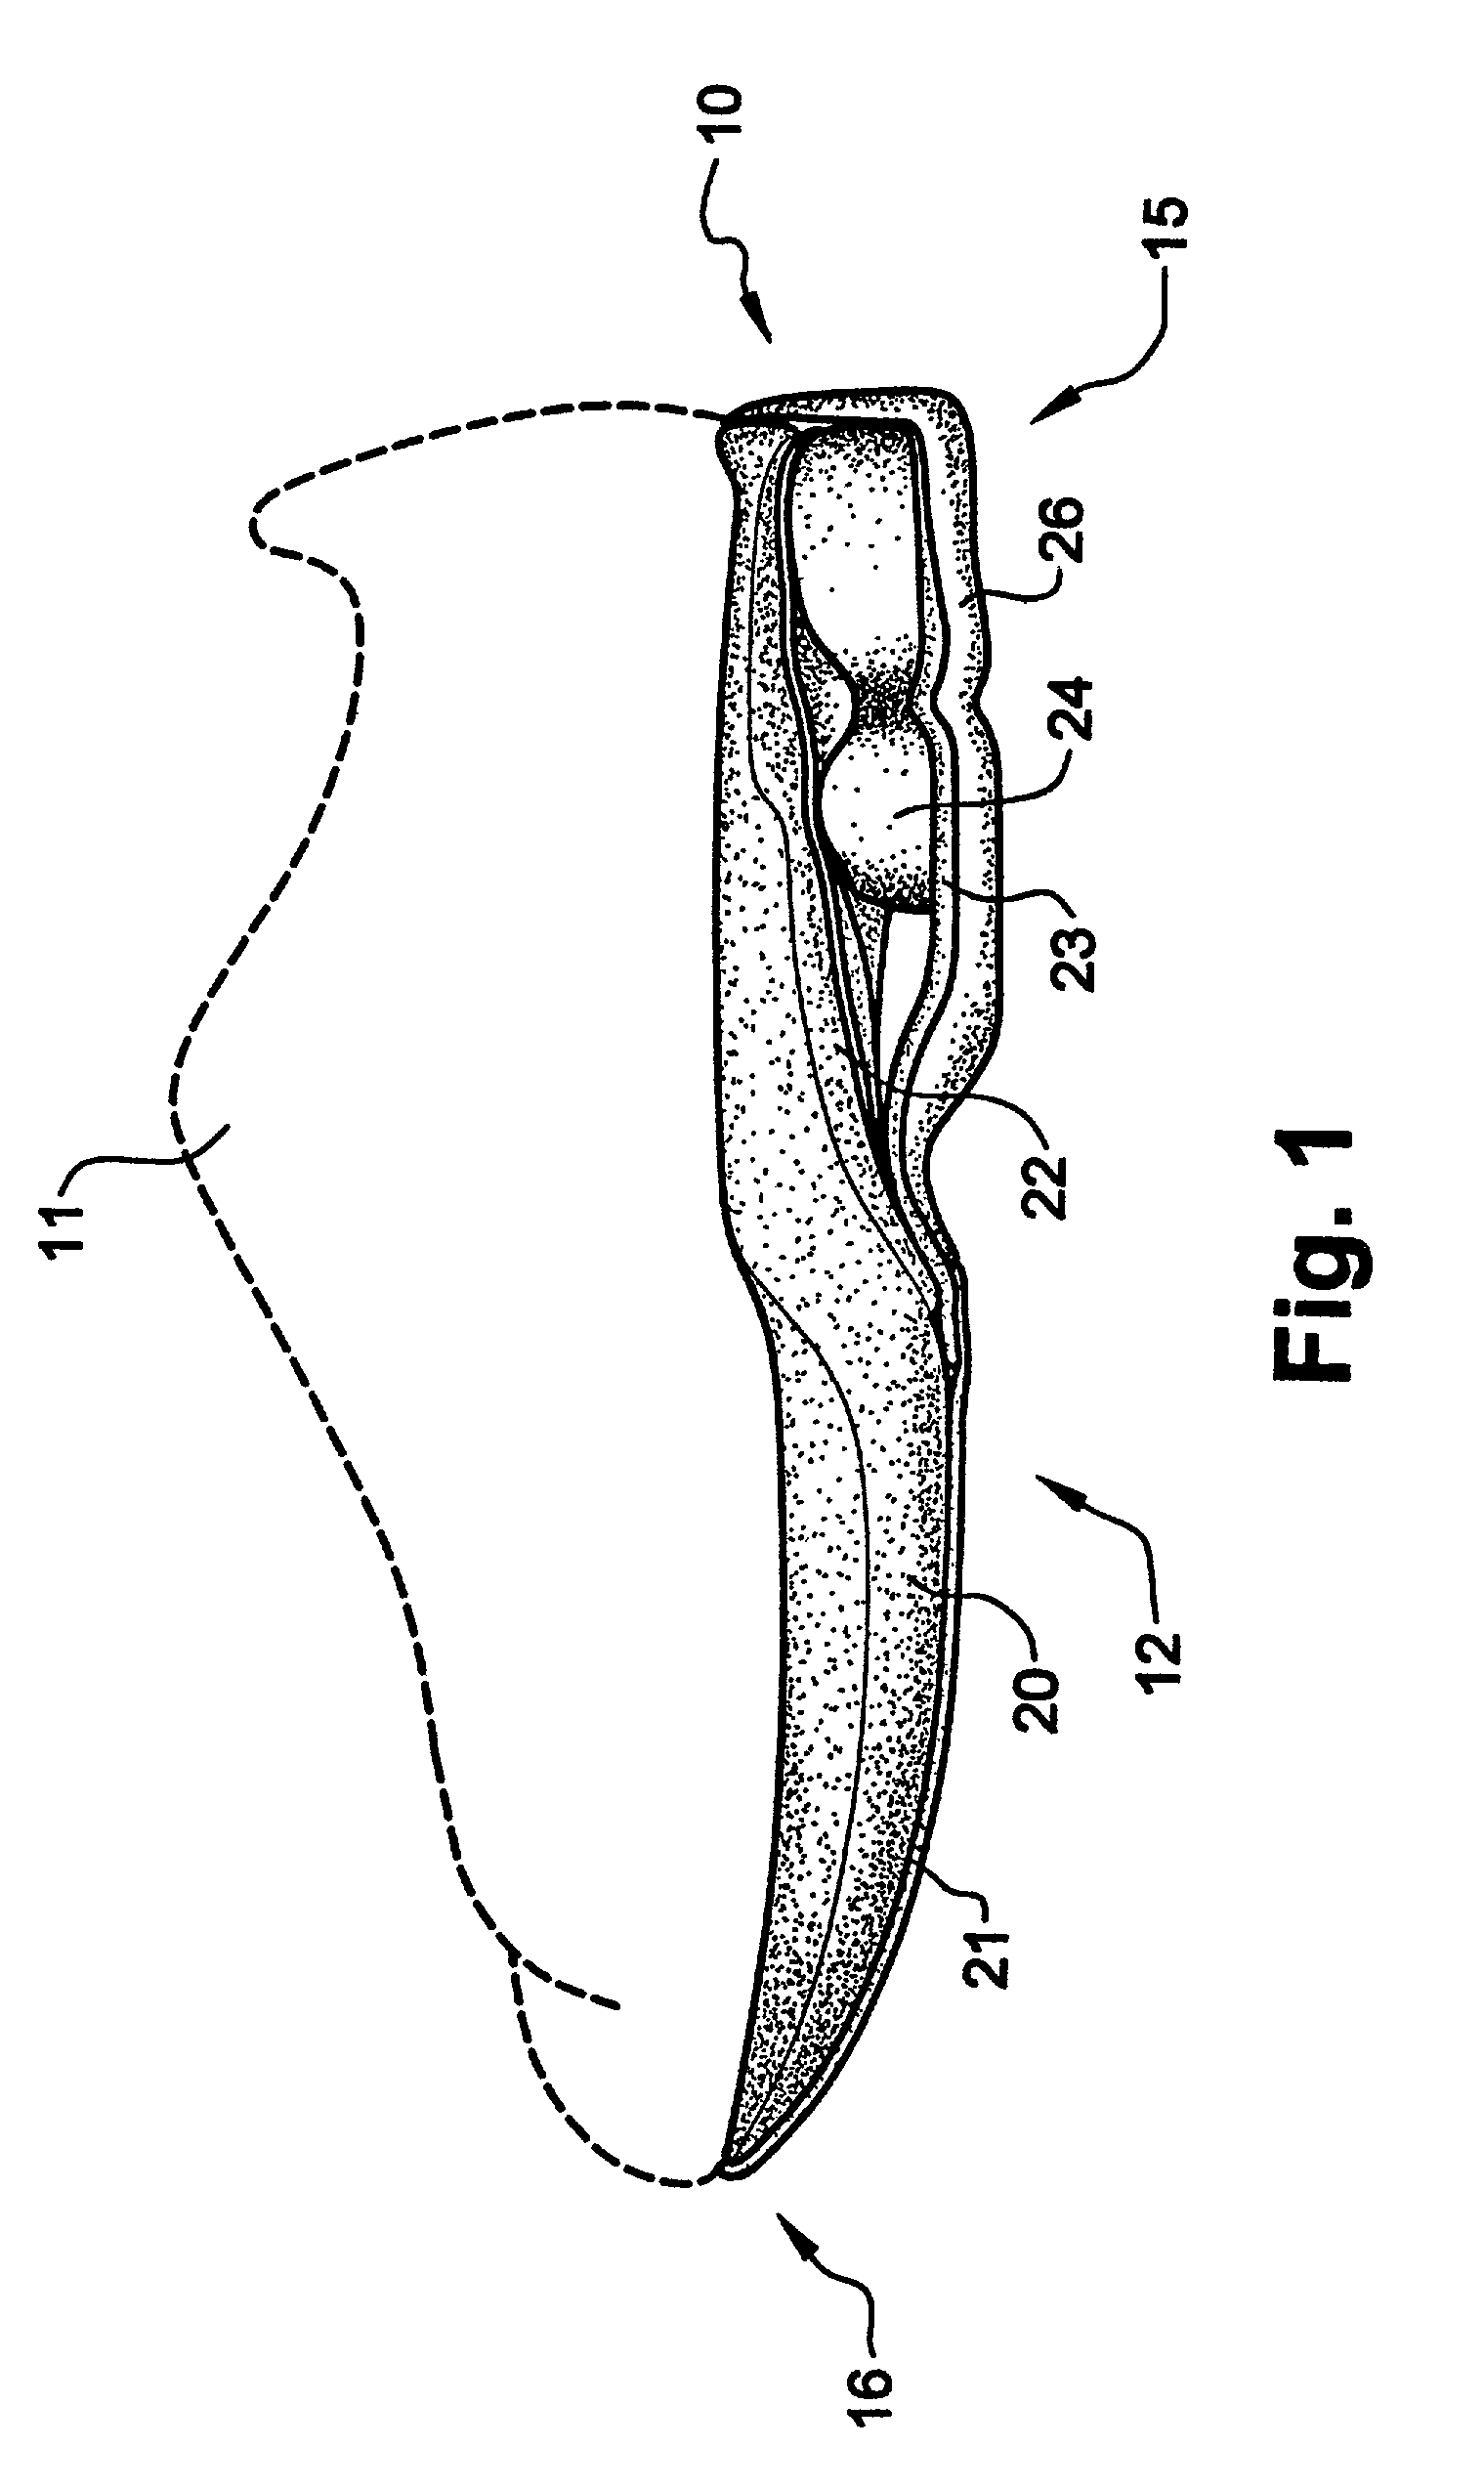 Shoe incorporating improved shock absorption and stabilizing elements